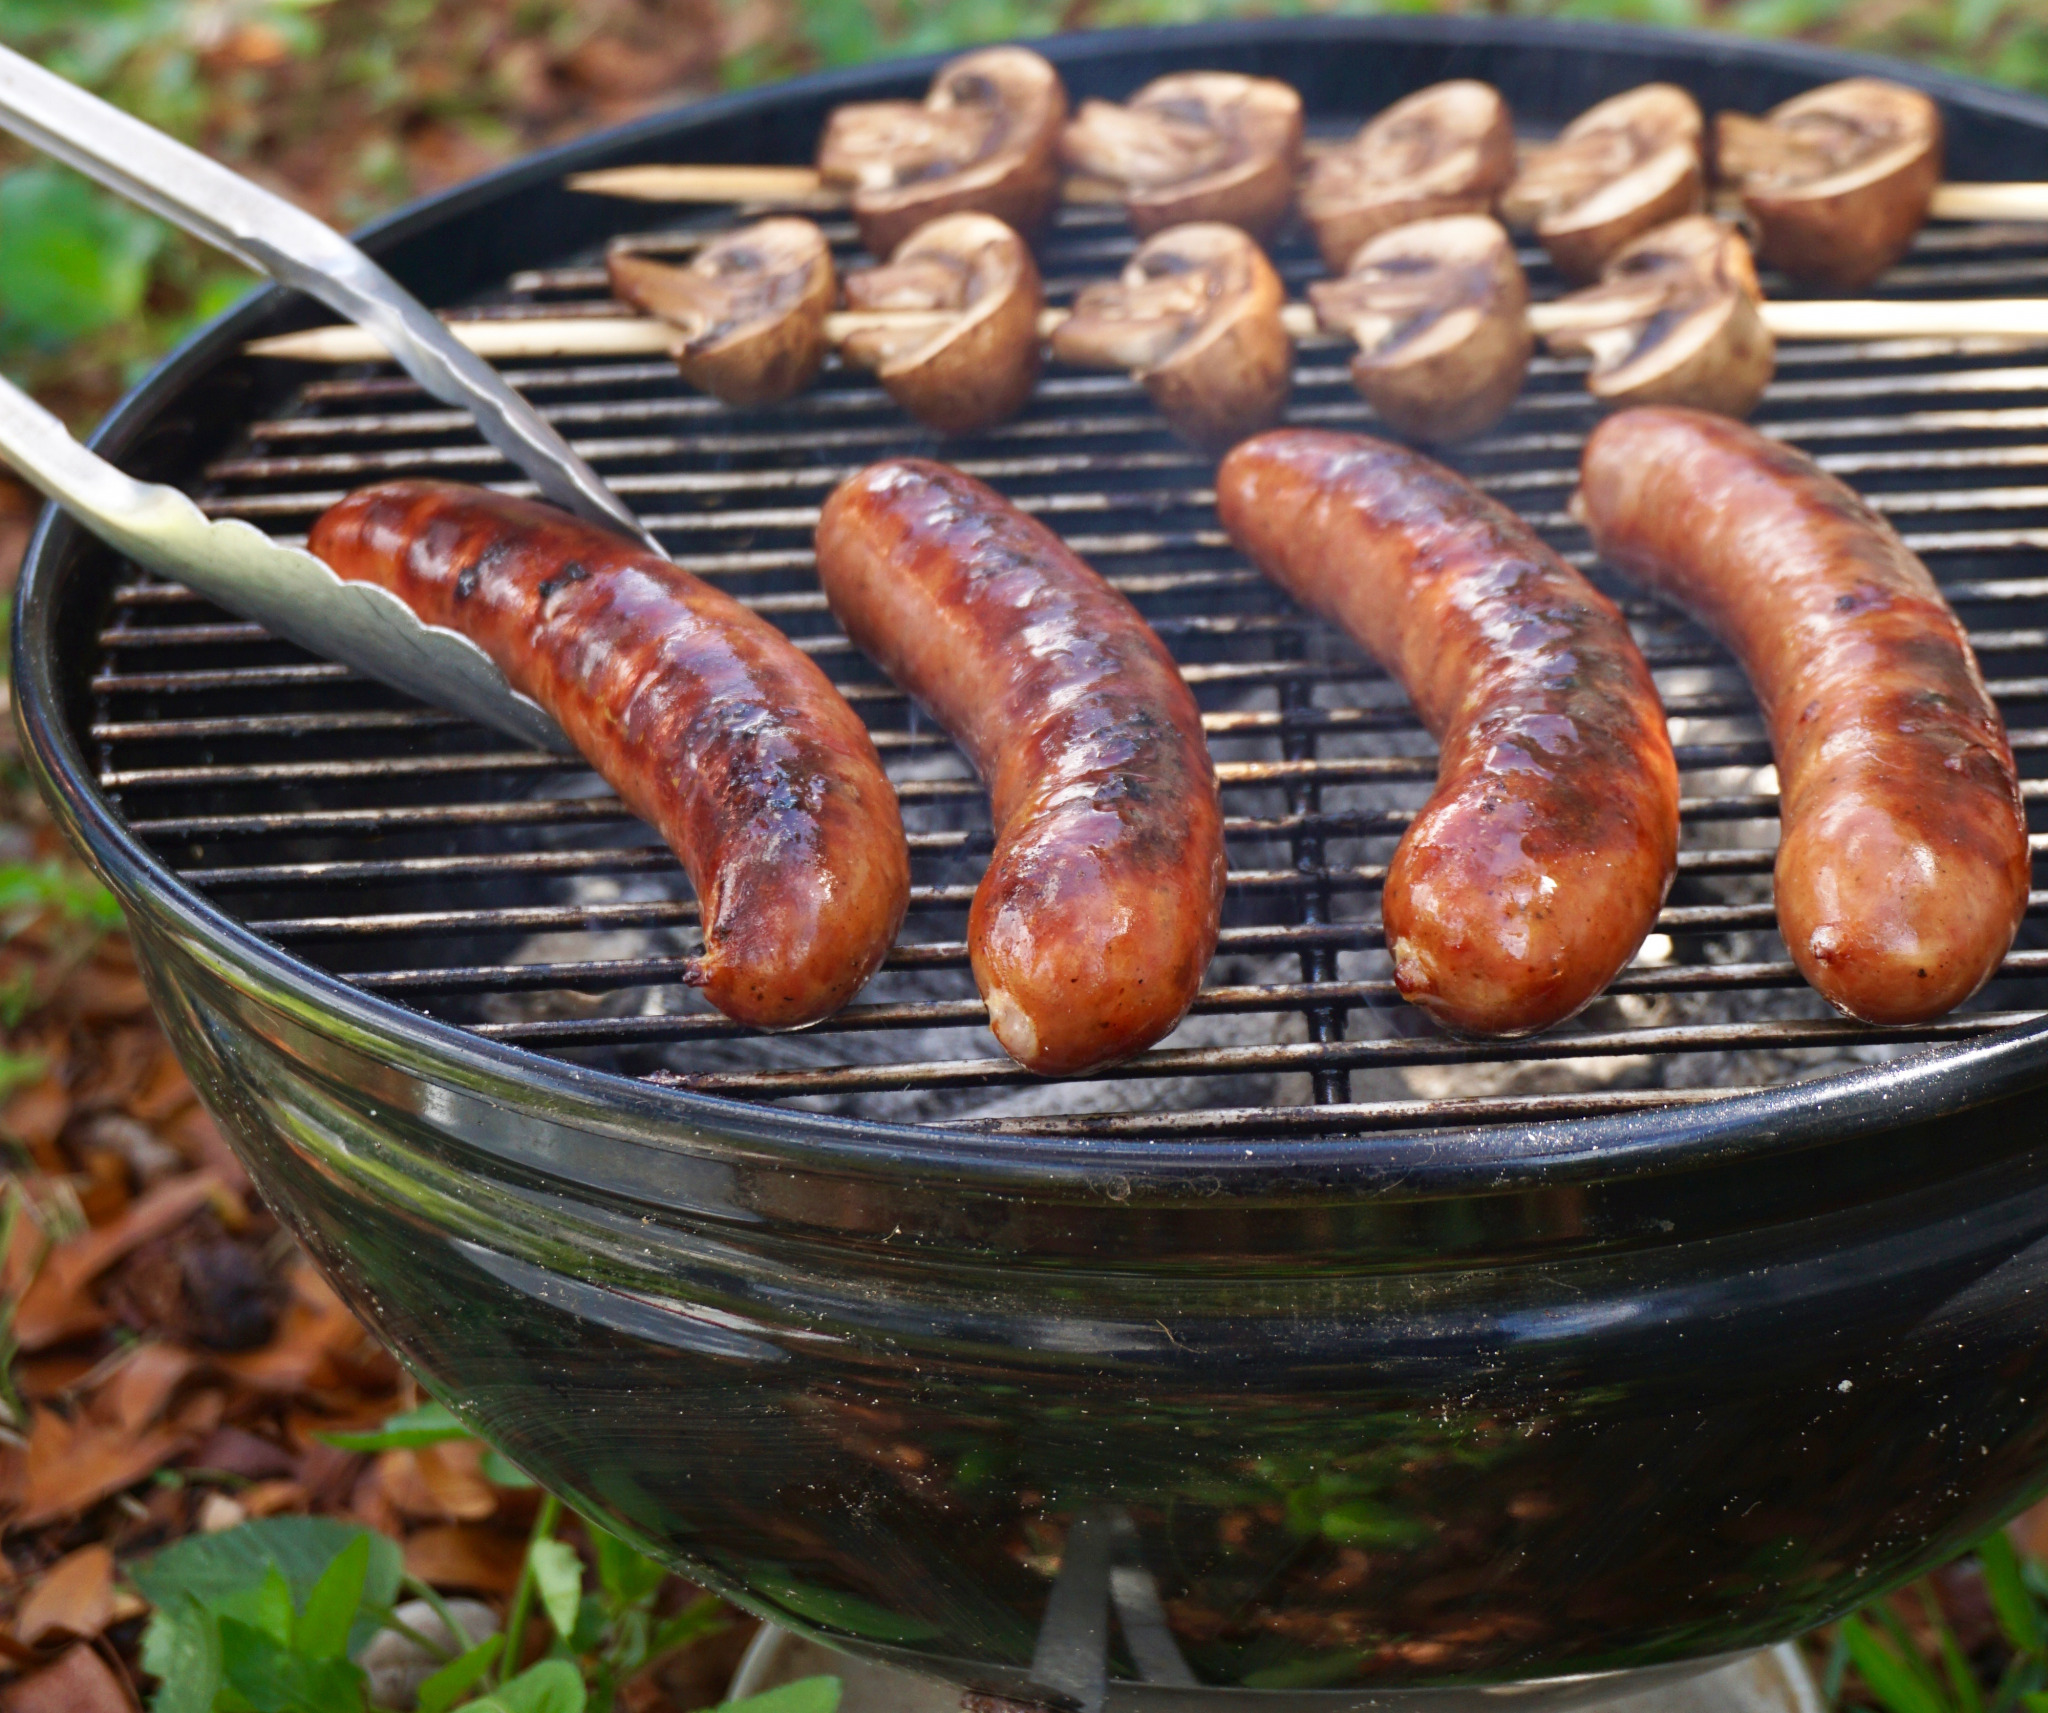 Tips for grilling the best brats